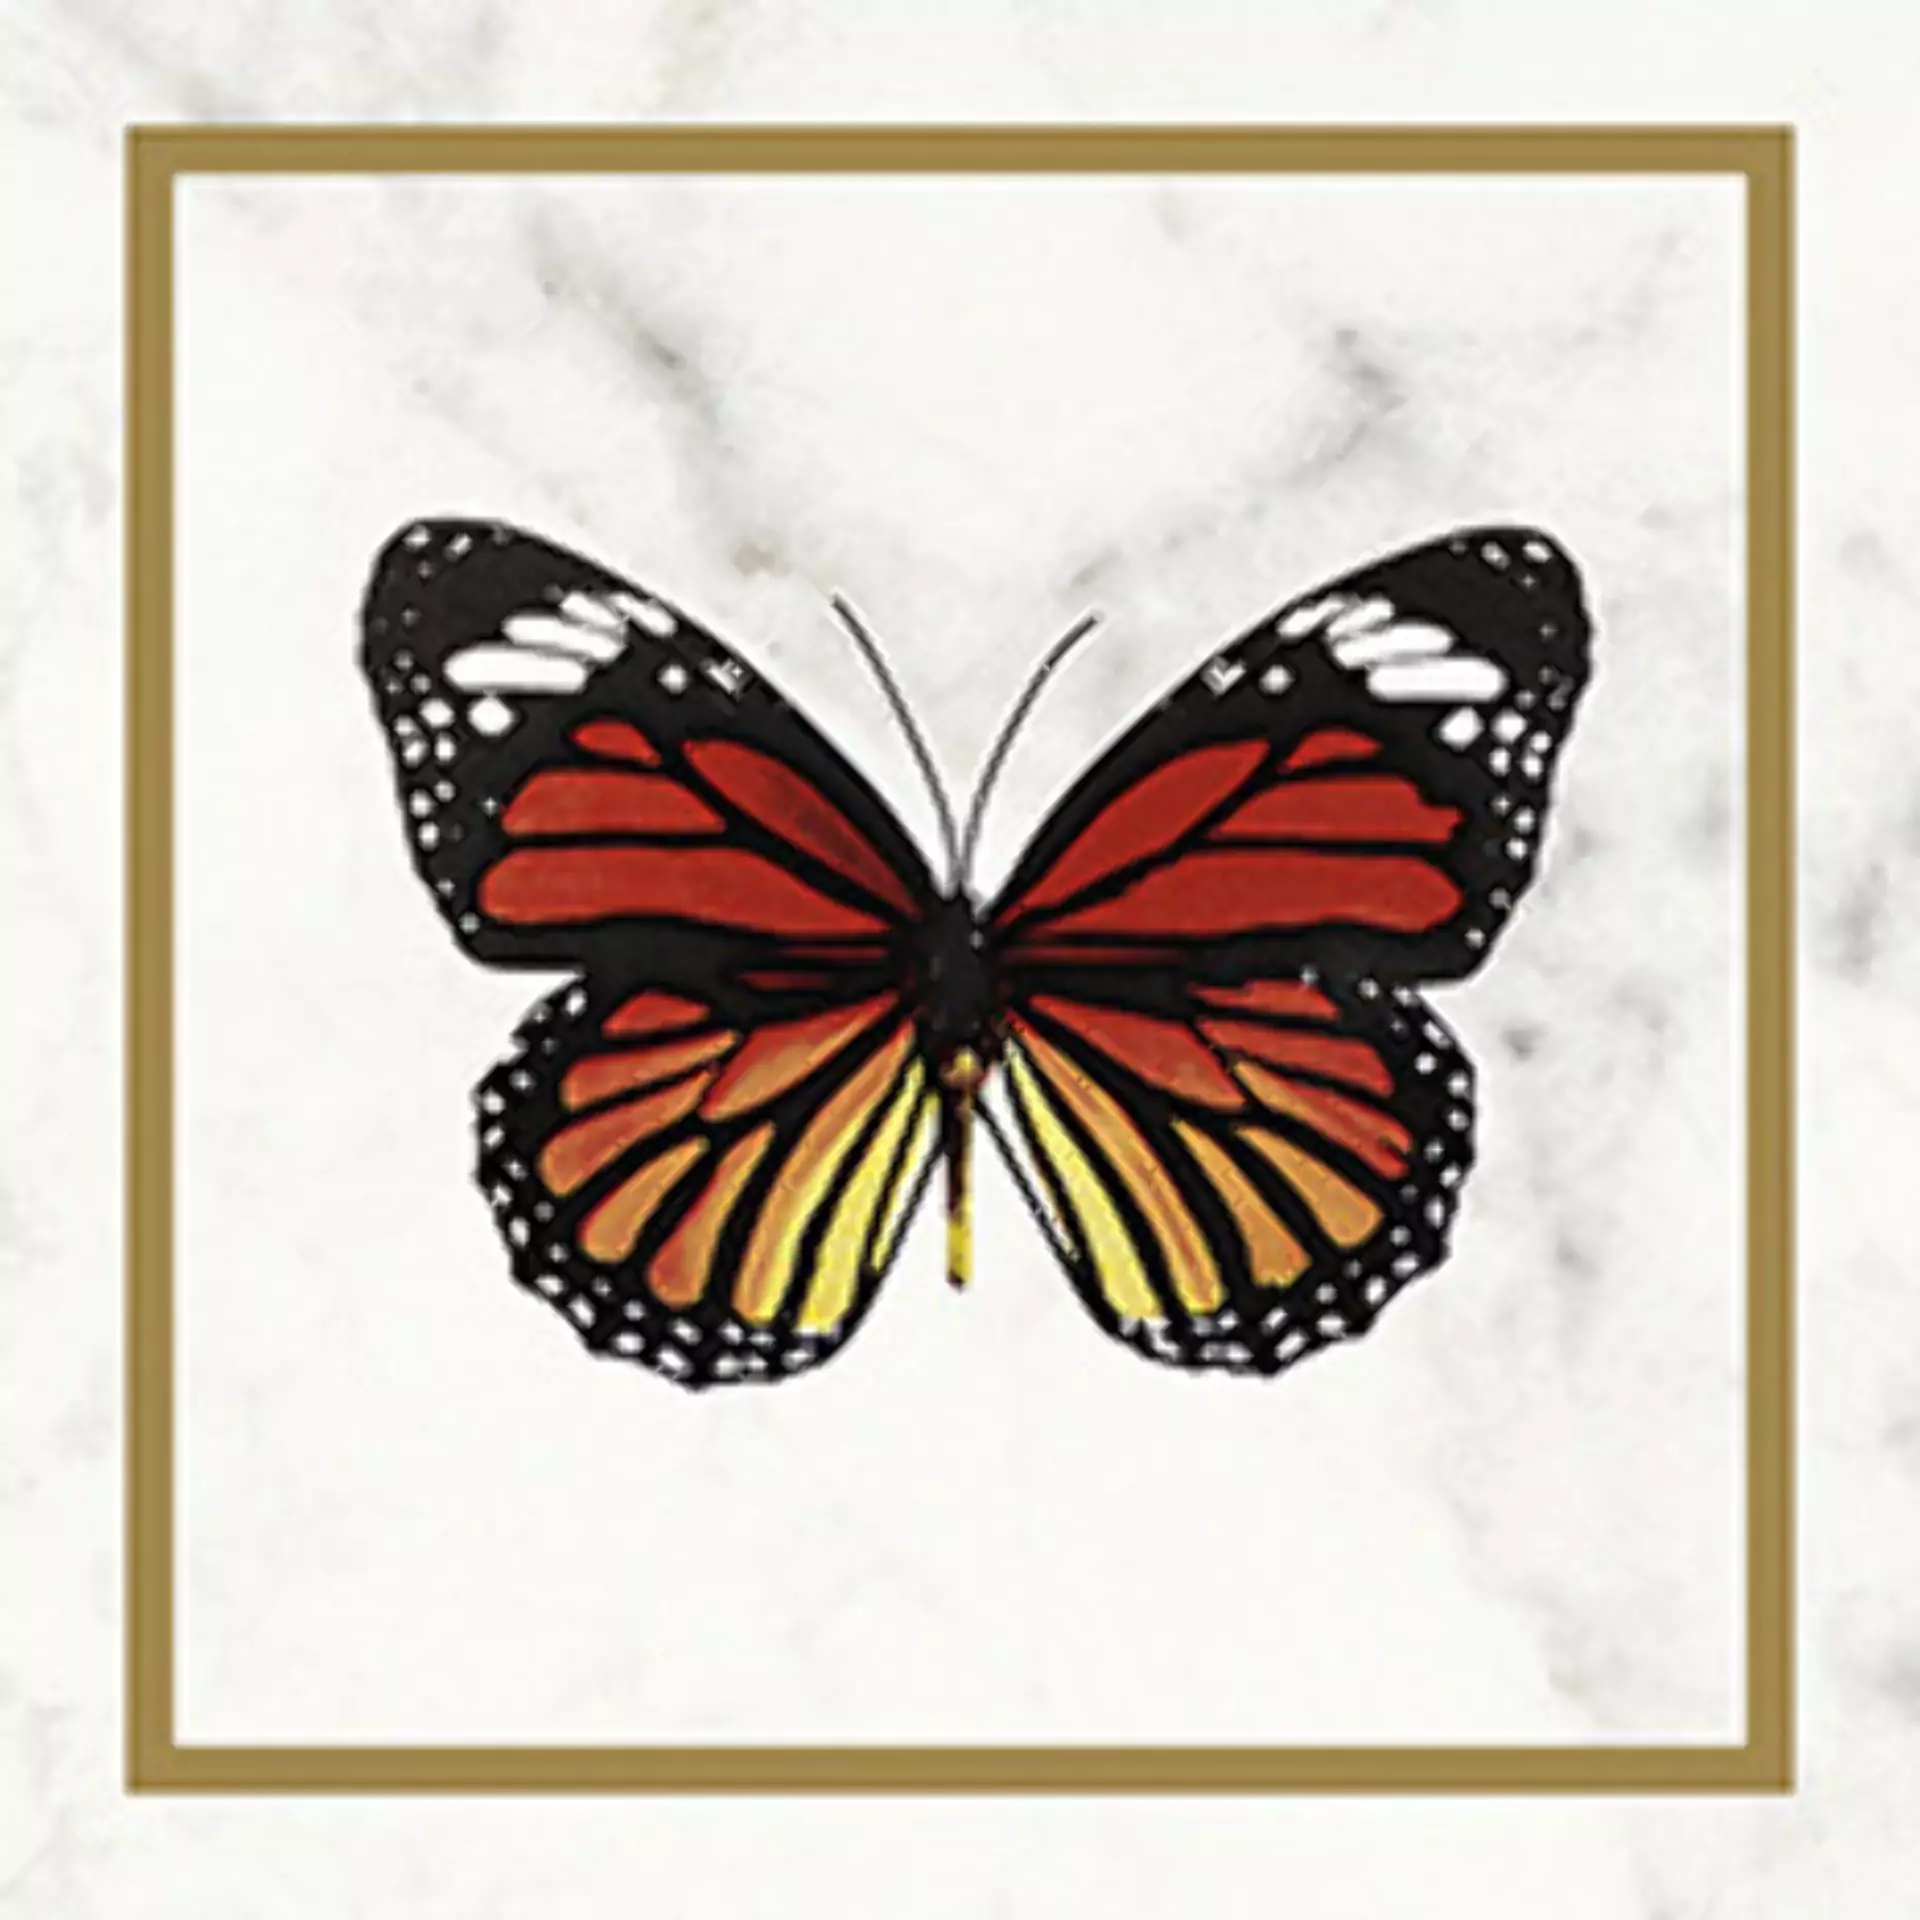 Villeroy & Boch Victorian White - Gold Glossy Decor Butterfly 1222-MK0E 20x20cm rectified 10mm